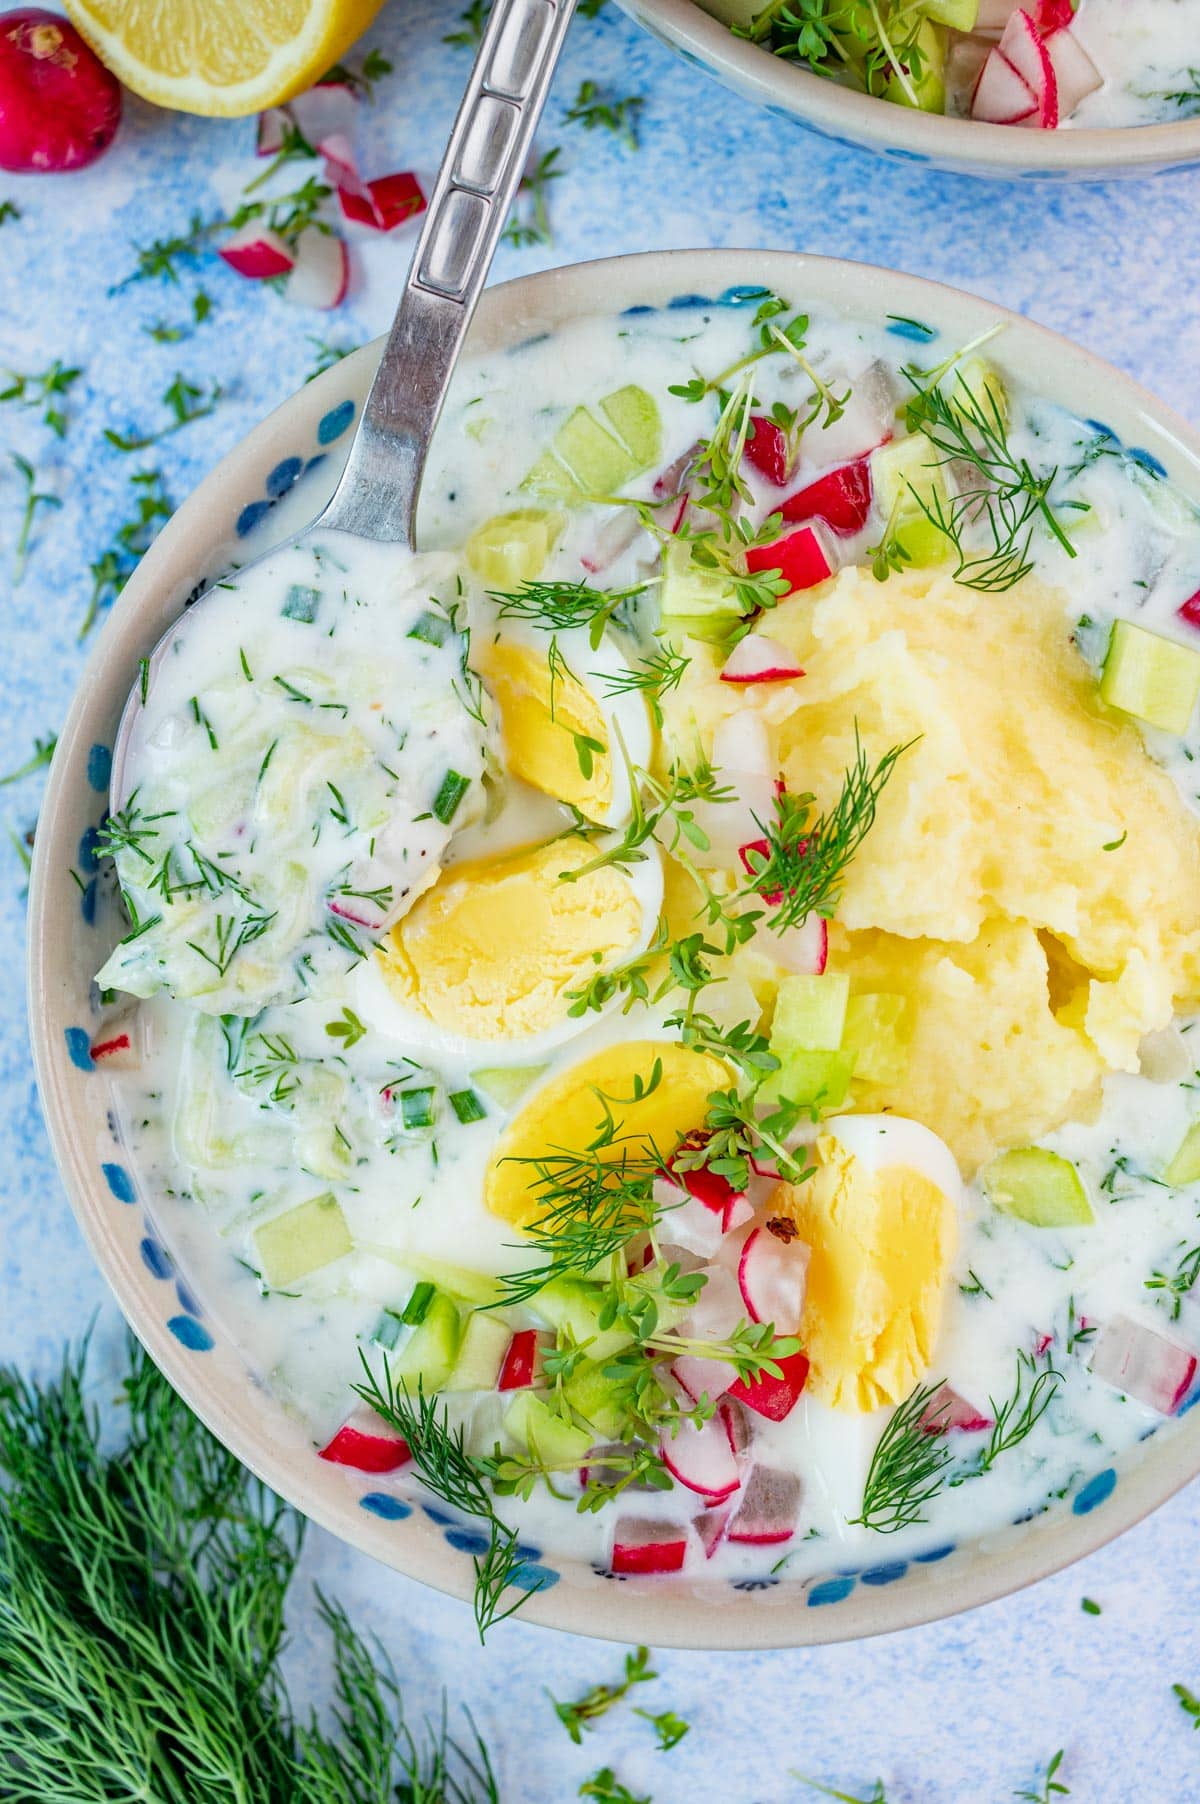 Chlodnik ogorkowy soup in a white bowl topped with eggs, potatoes, and radishes.